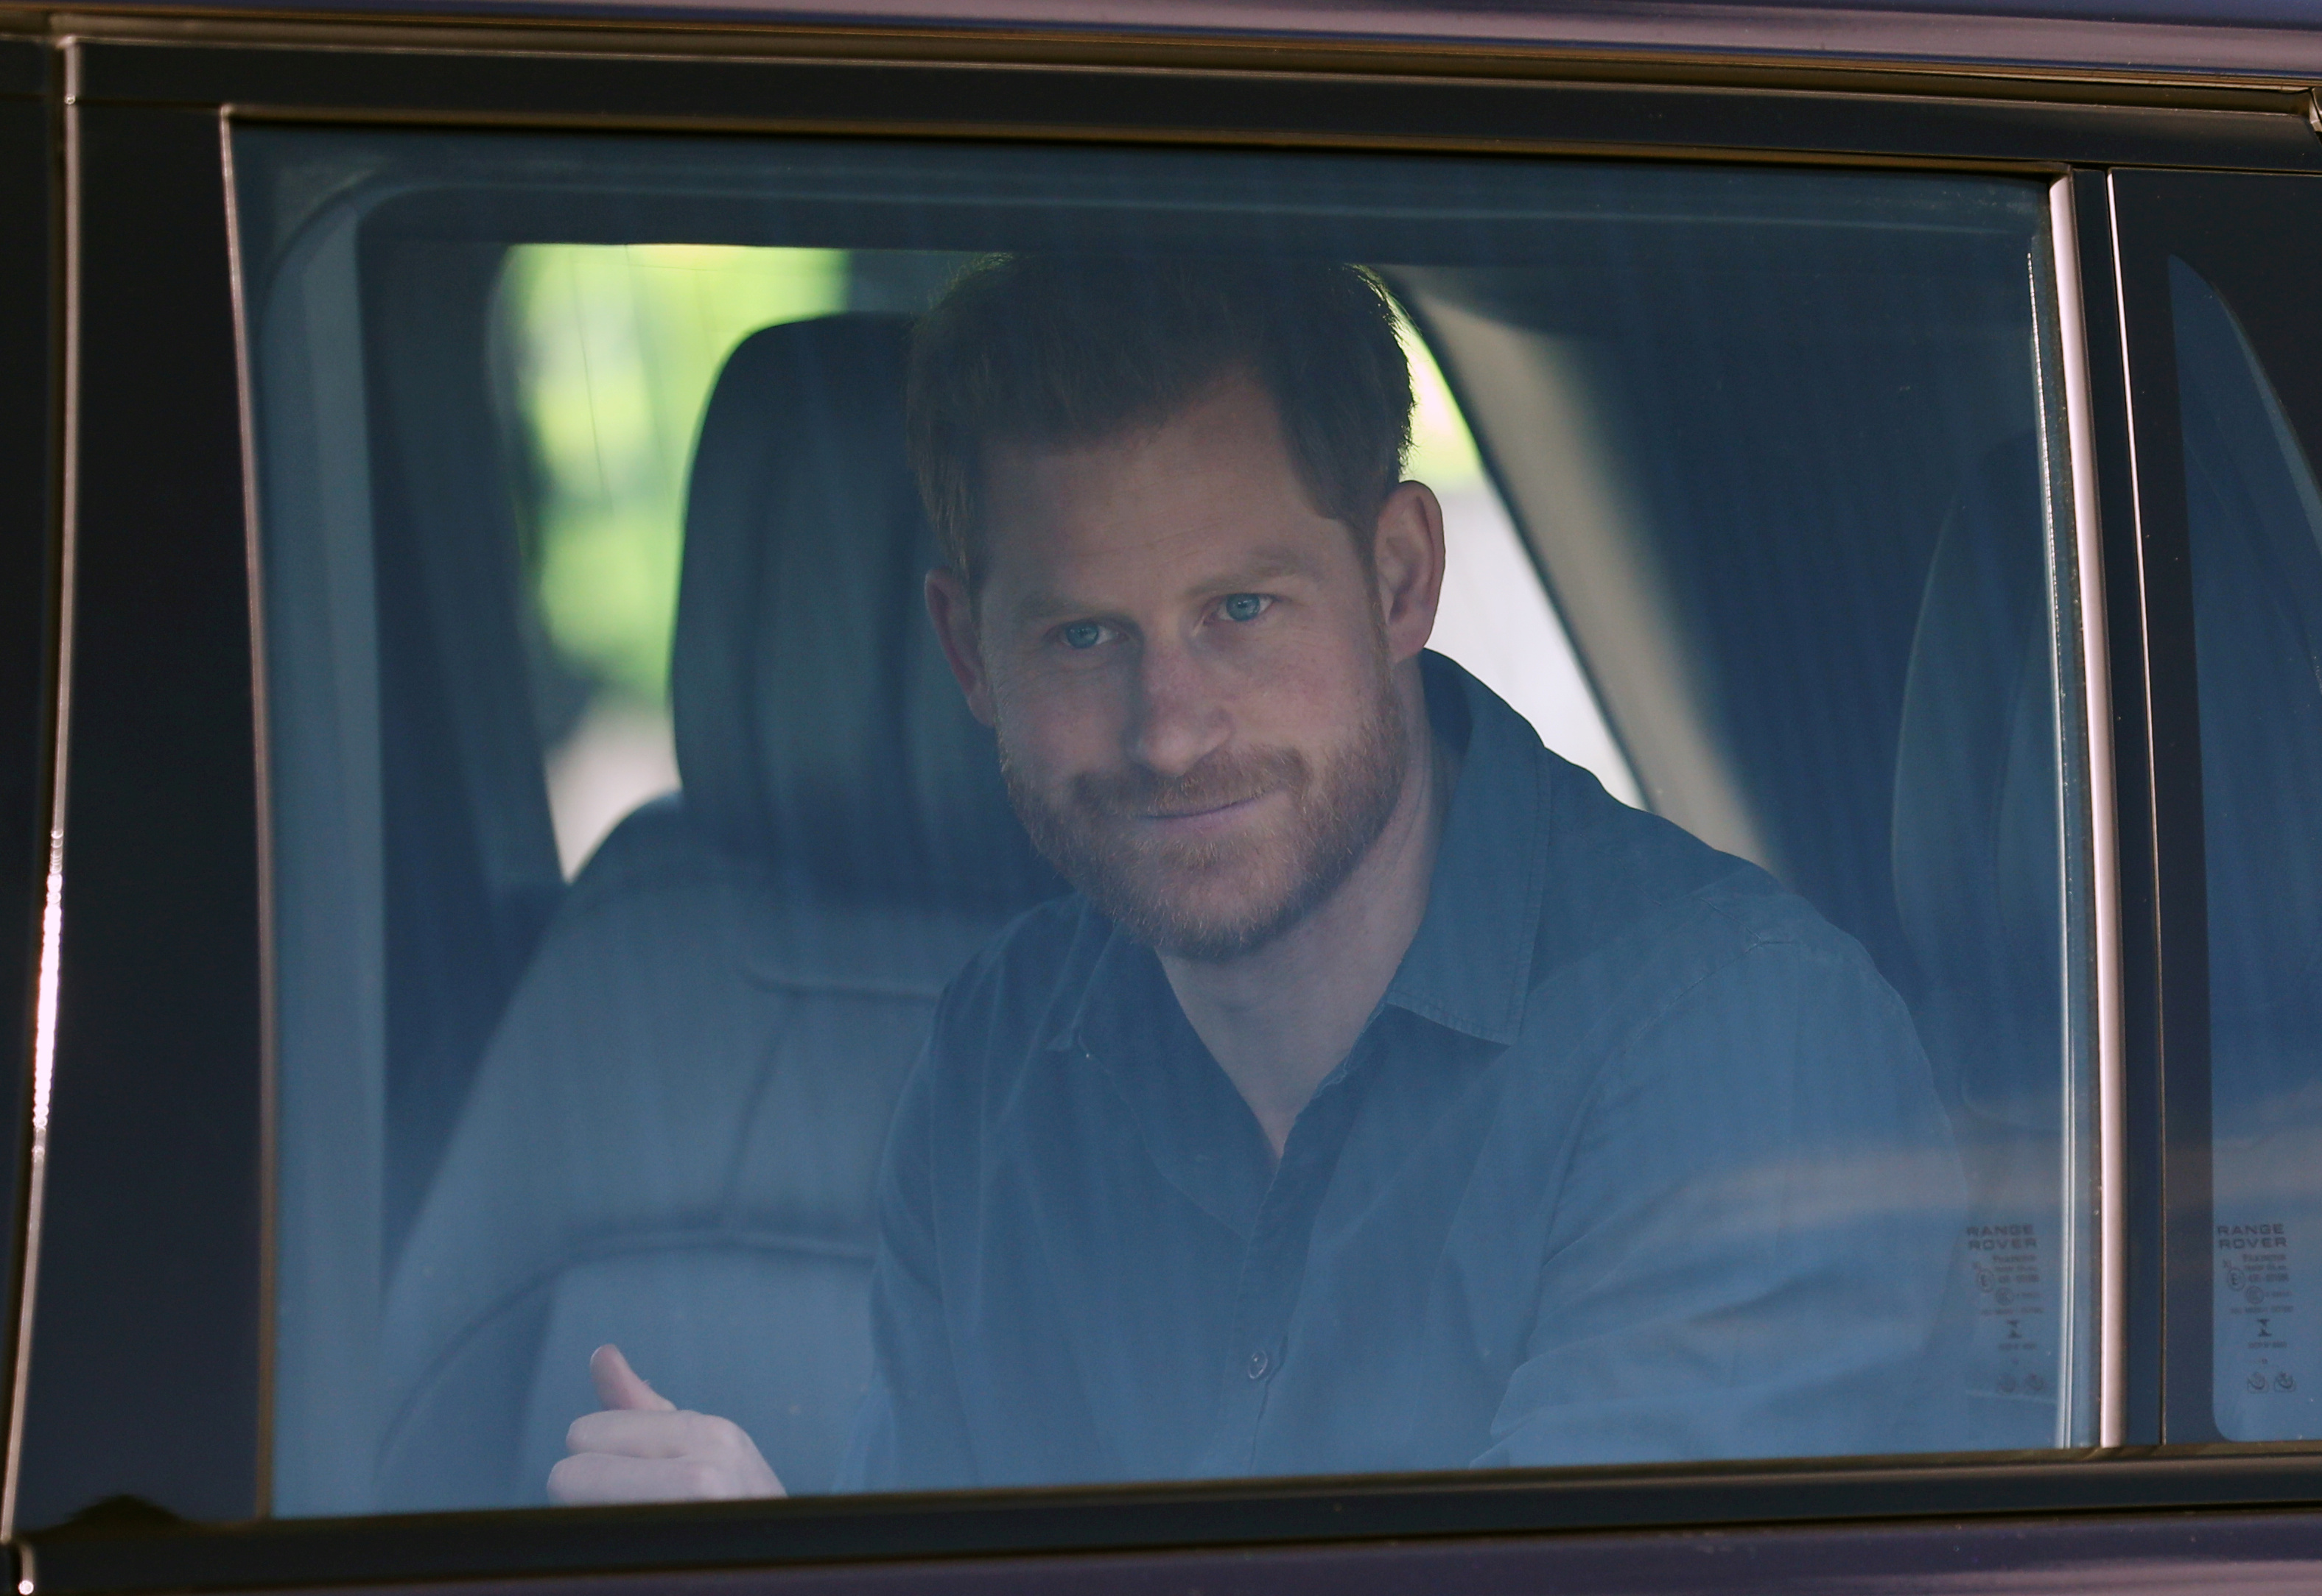 Prince Harry seen through car window at The Silverstone Experience Tour